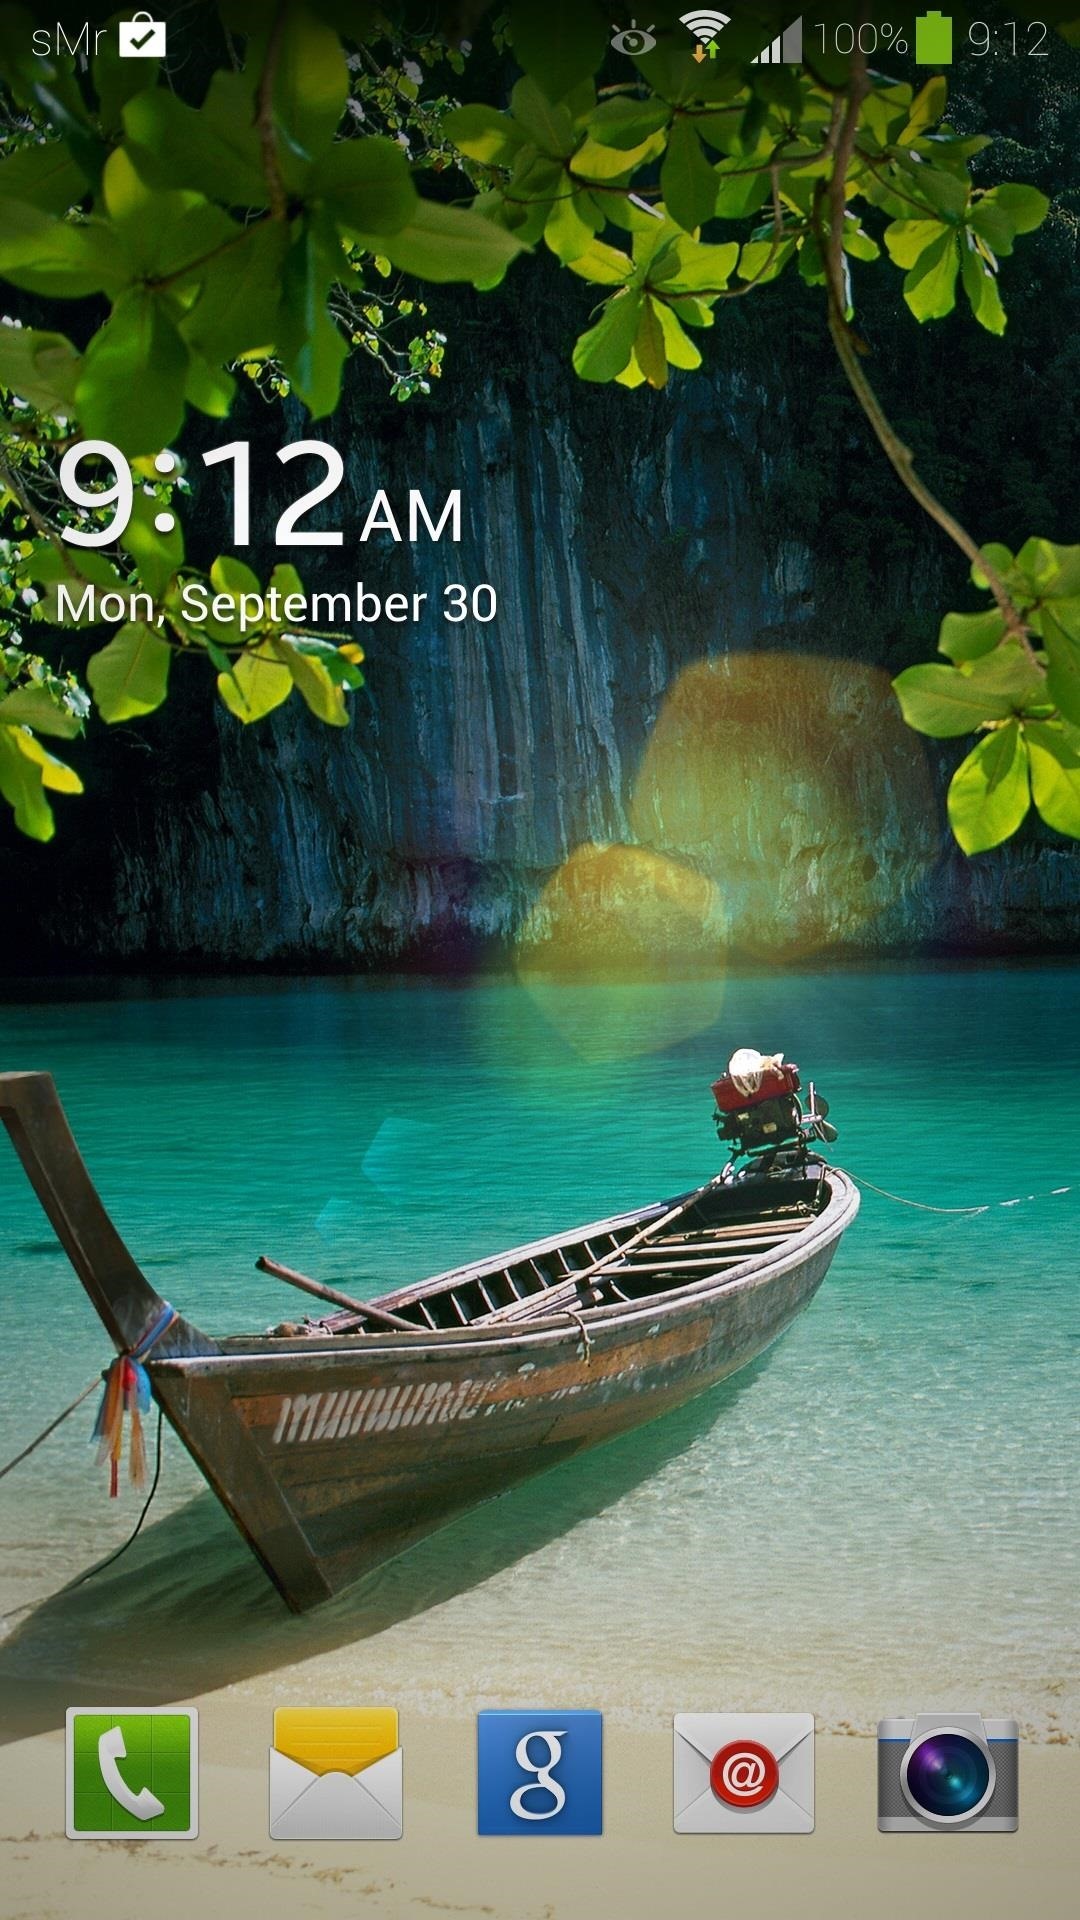 How to Retain Swipe to Unlock Effects with Lock Screen Security on a Samsung Galaxy S4